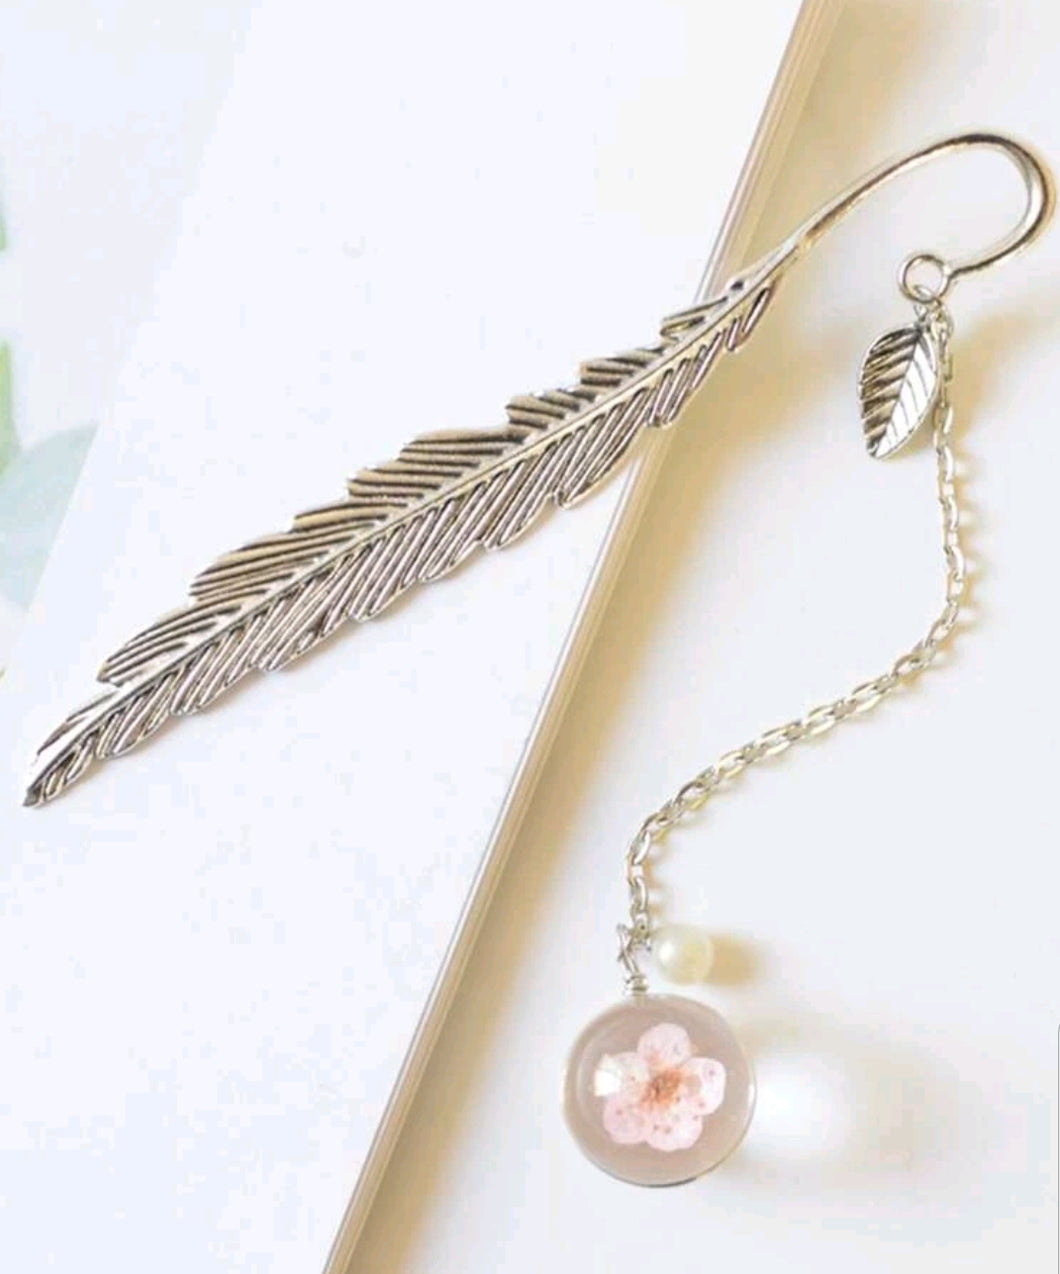  'Feather & Pendant Decor Metal Bookmark' Stylish stationery accessory - elegant and flowery bookmark to insert in your favourite book you are reading. Lovely gift idea and desk decor item. Item on high demand!      Color: Gold     Type: Bookmarks     Composition: 100% Metal     Size: Length 12cm (4.7inch) X Width 2 cm (0.8 inch)